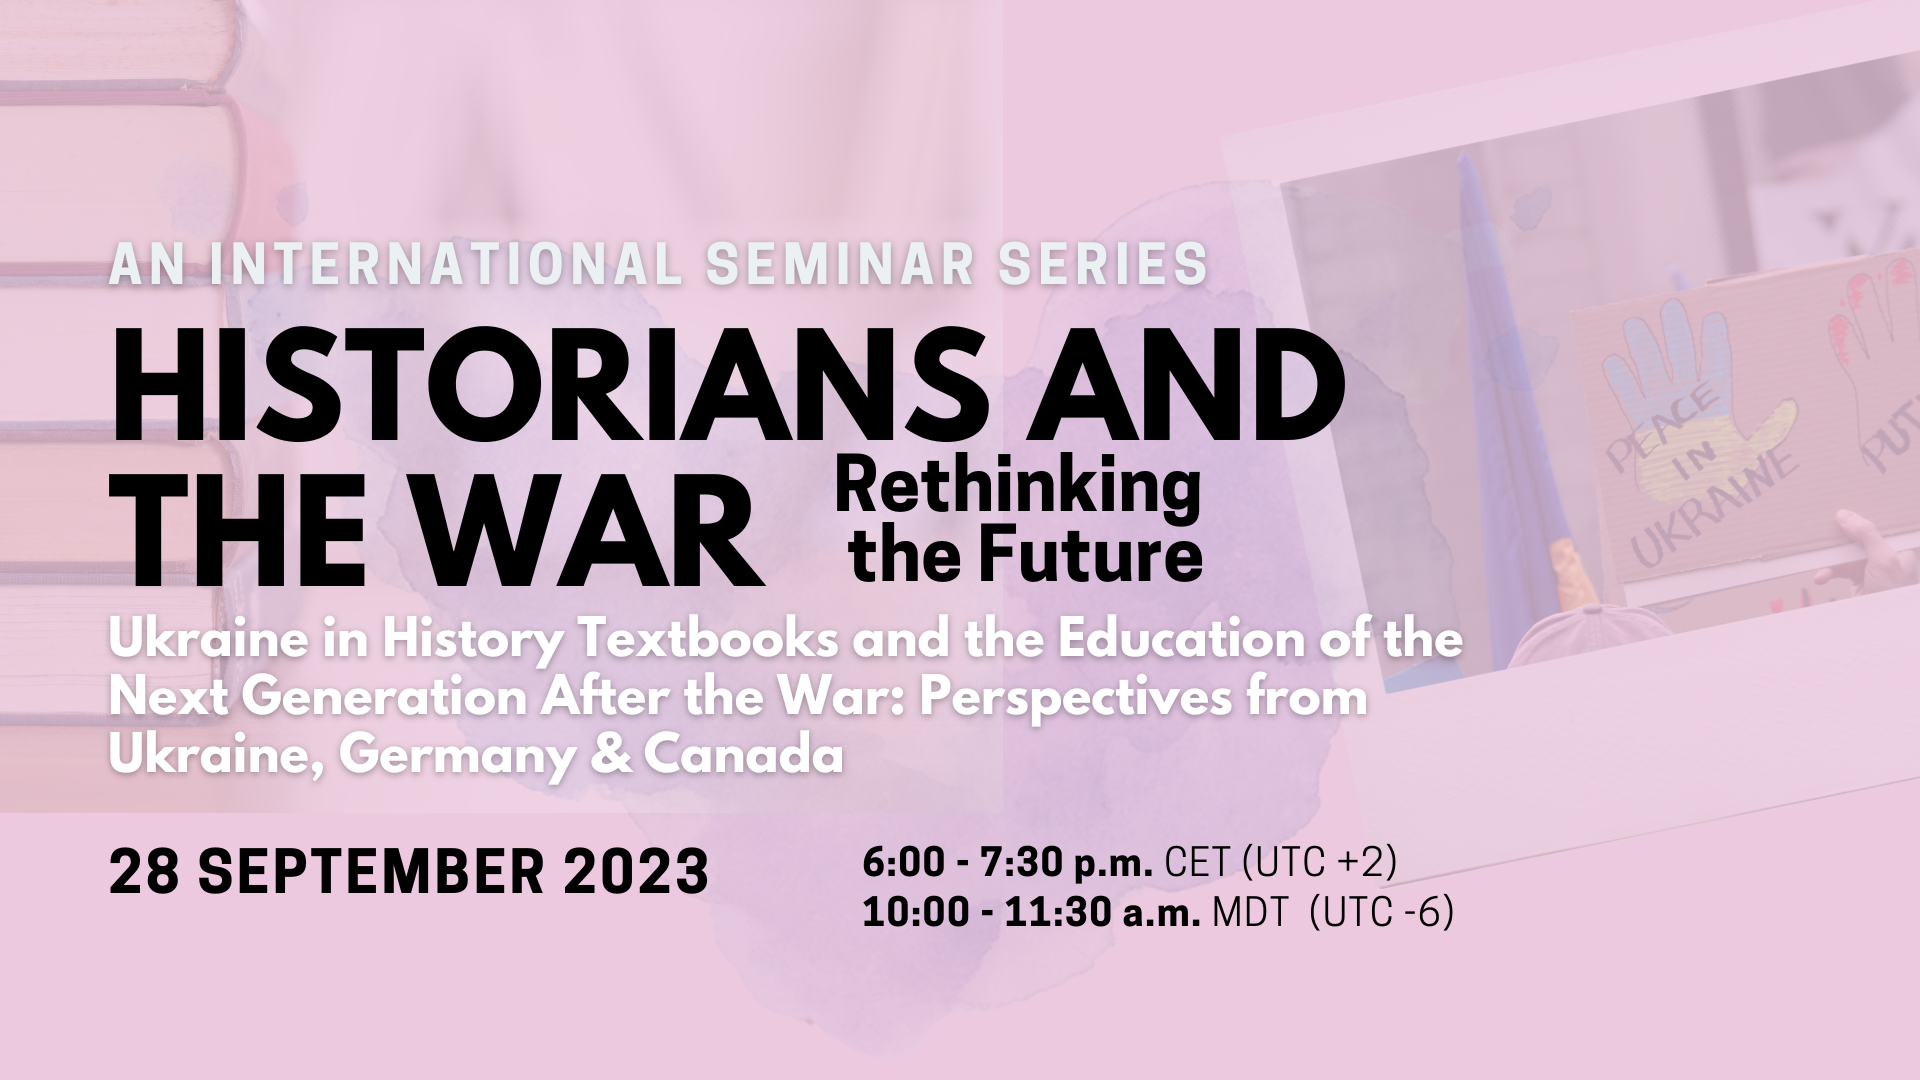 historians-and-the-war_education_september-2023-facebook-event-cover.png